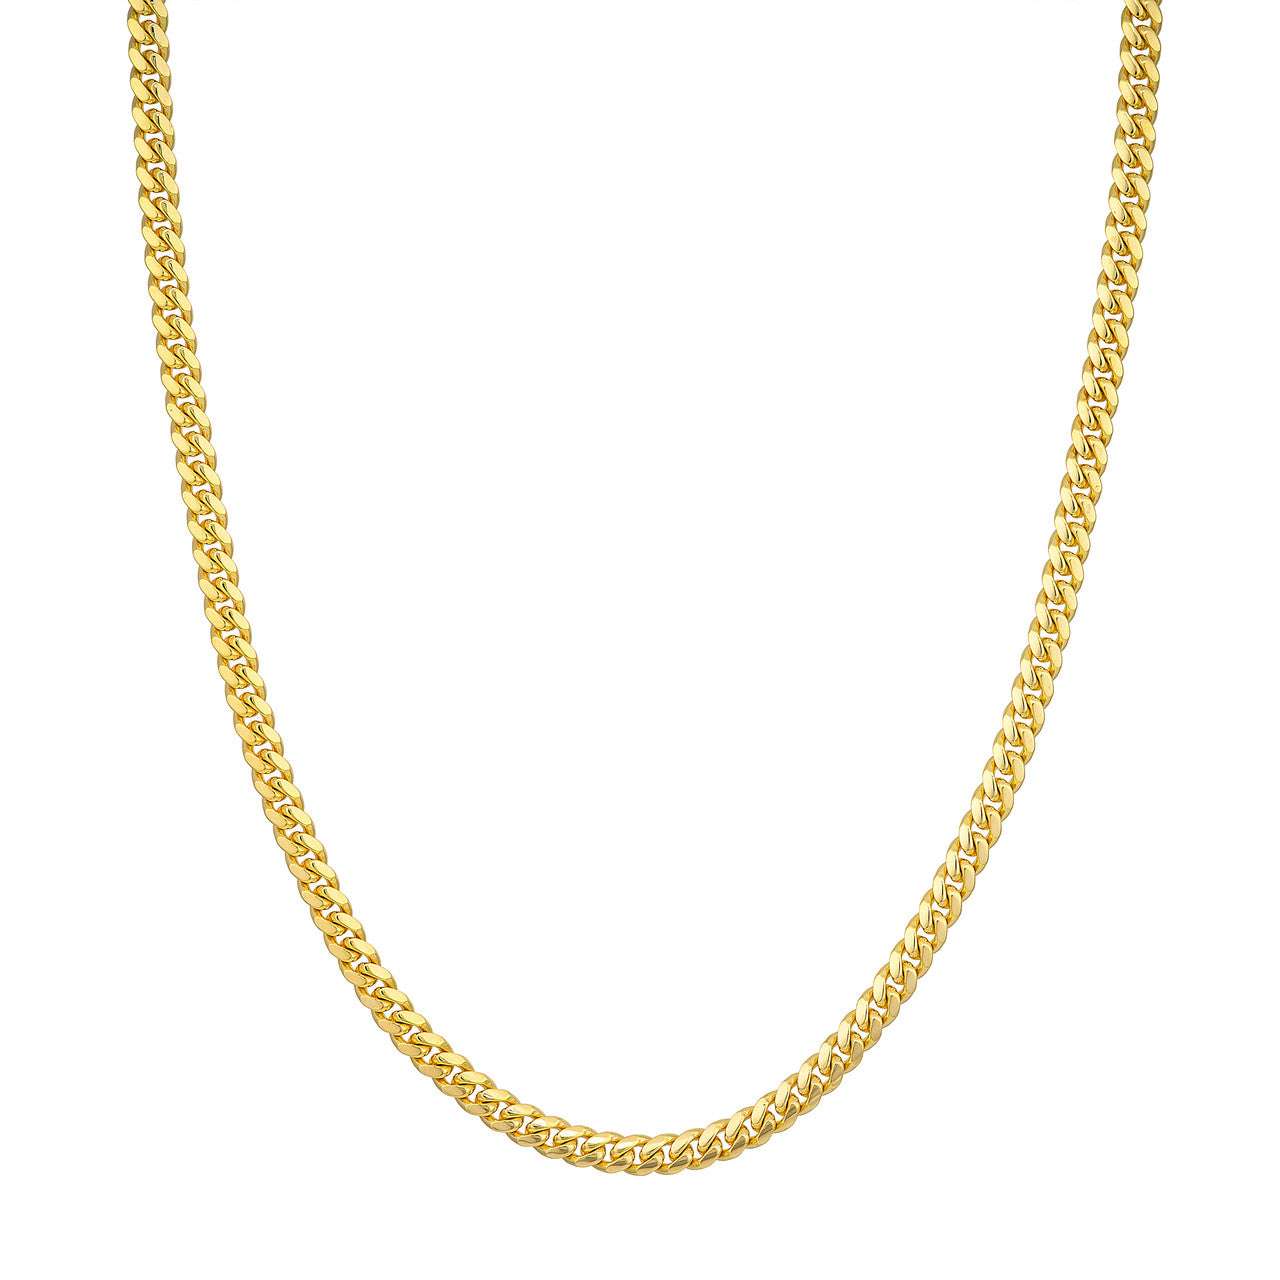 Men's 10kt Gold 20-26" 5.0mm Miami Cuban Chain with Lobster Lock